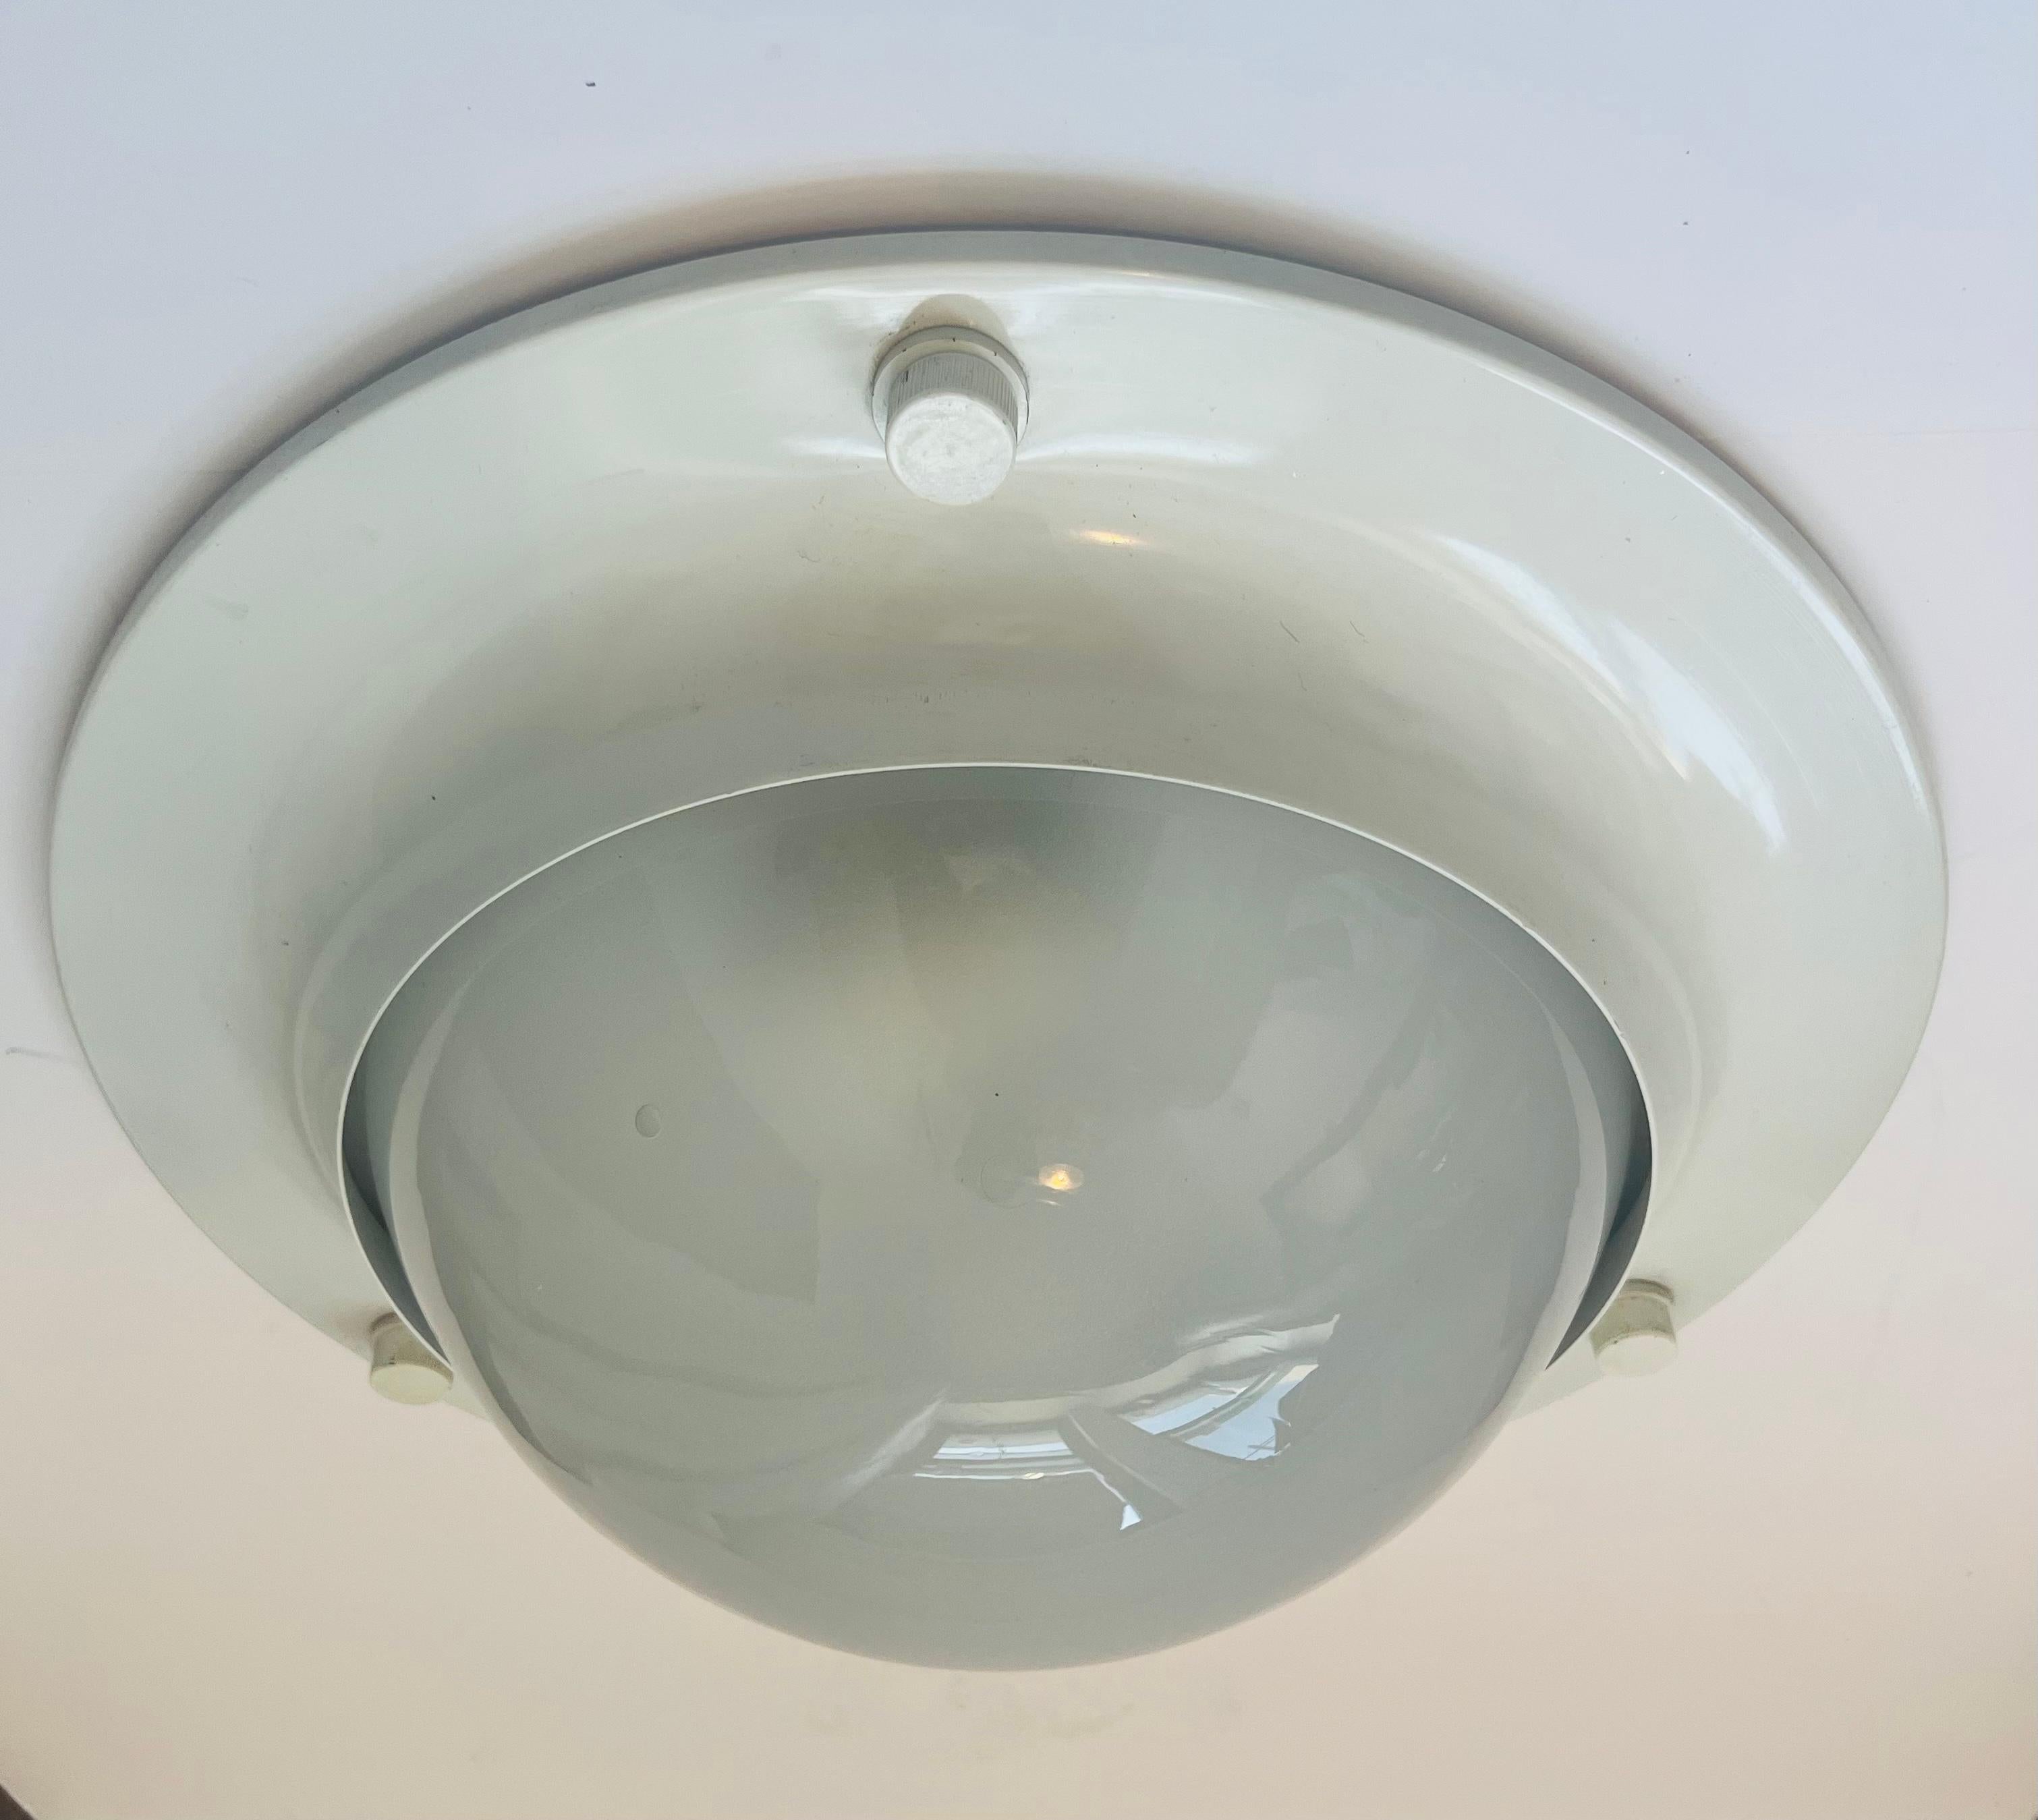 A 1960s Italian Mid Century Nautical Space Age Style flush ceiling lamp done in a white enamel frame with a white dome glass shade. Two 100 watt light sockets. Rewired 